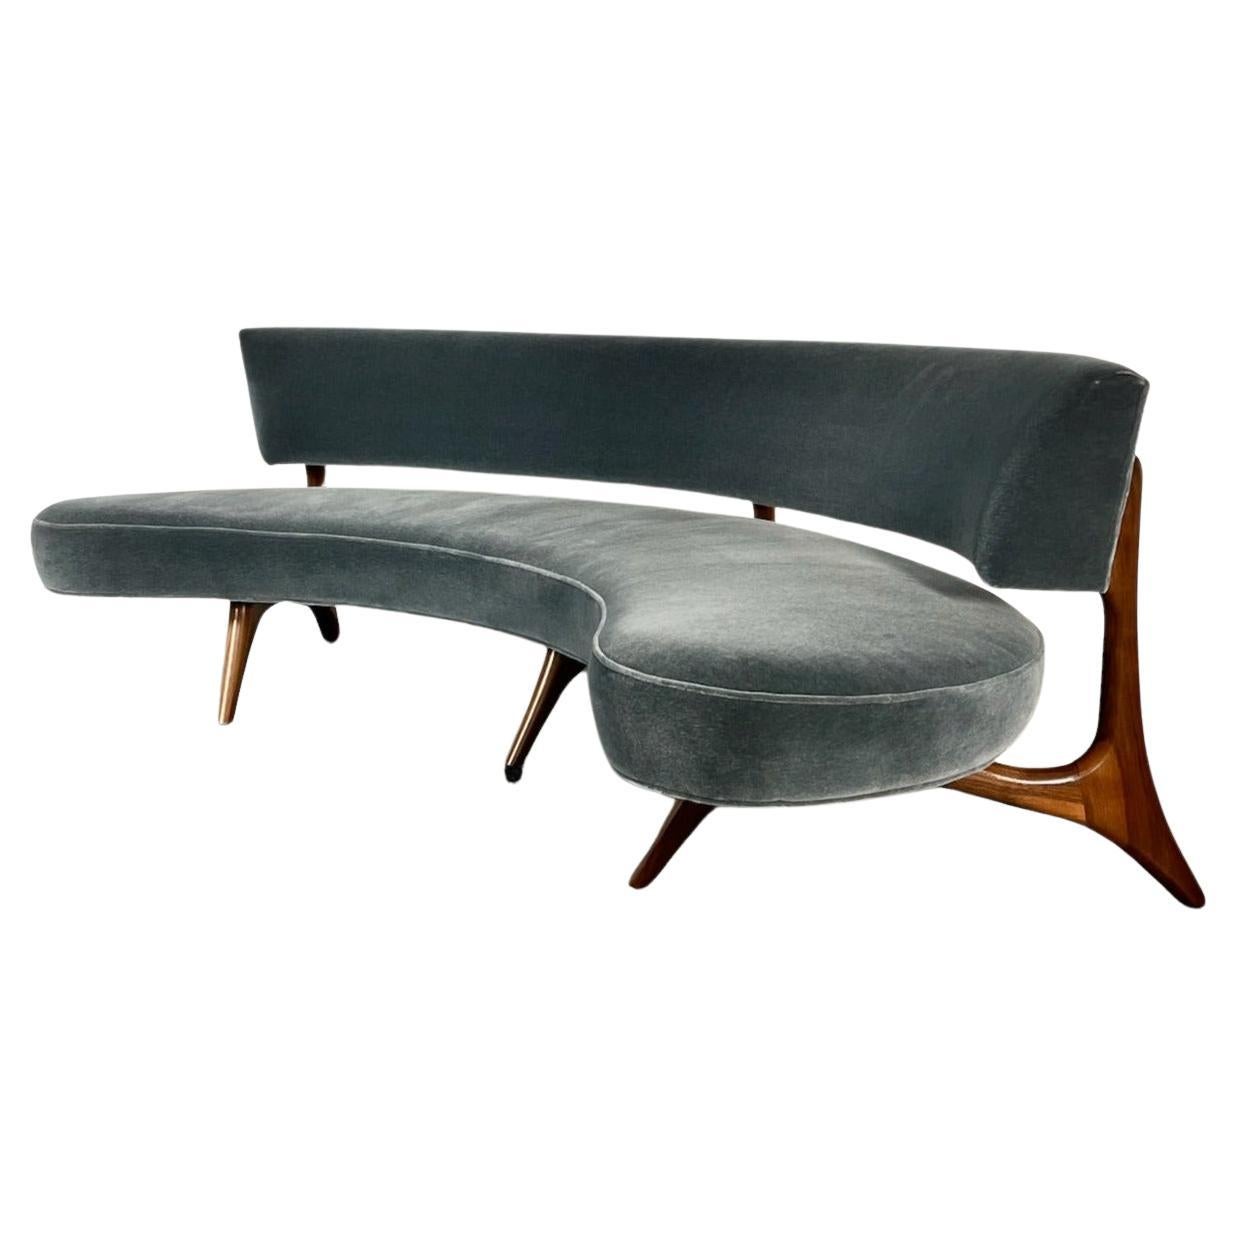 Floating Seat and Back Sofa in Mohair by Vladimir Kagan For Sale